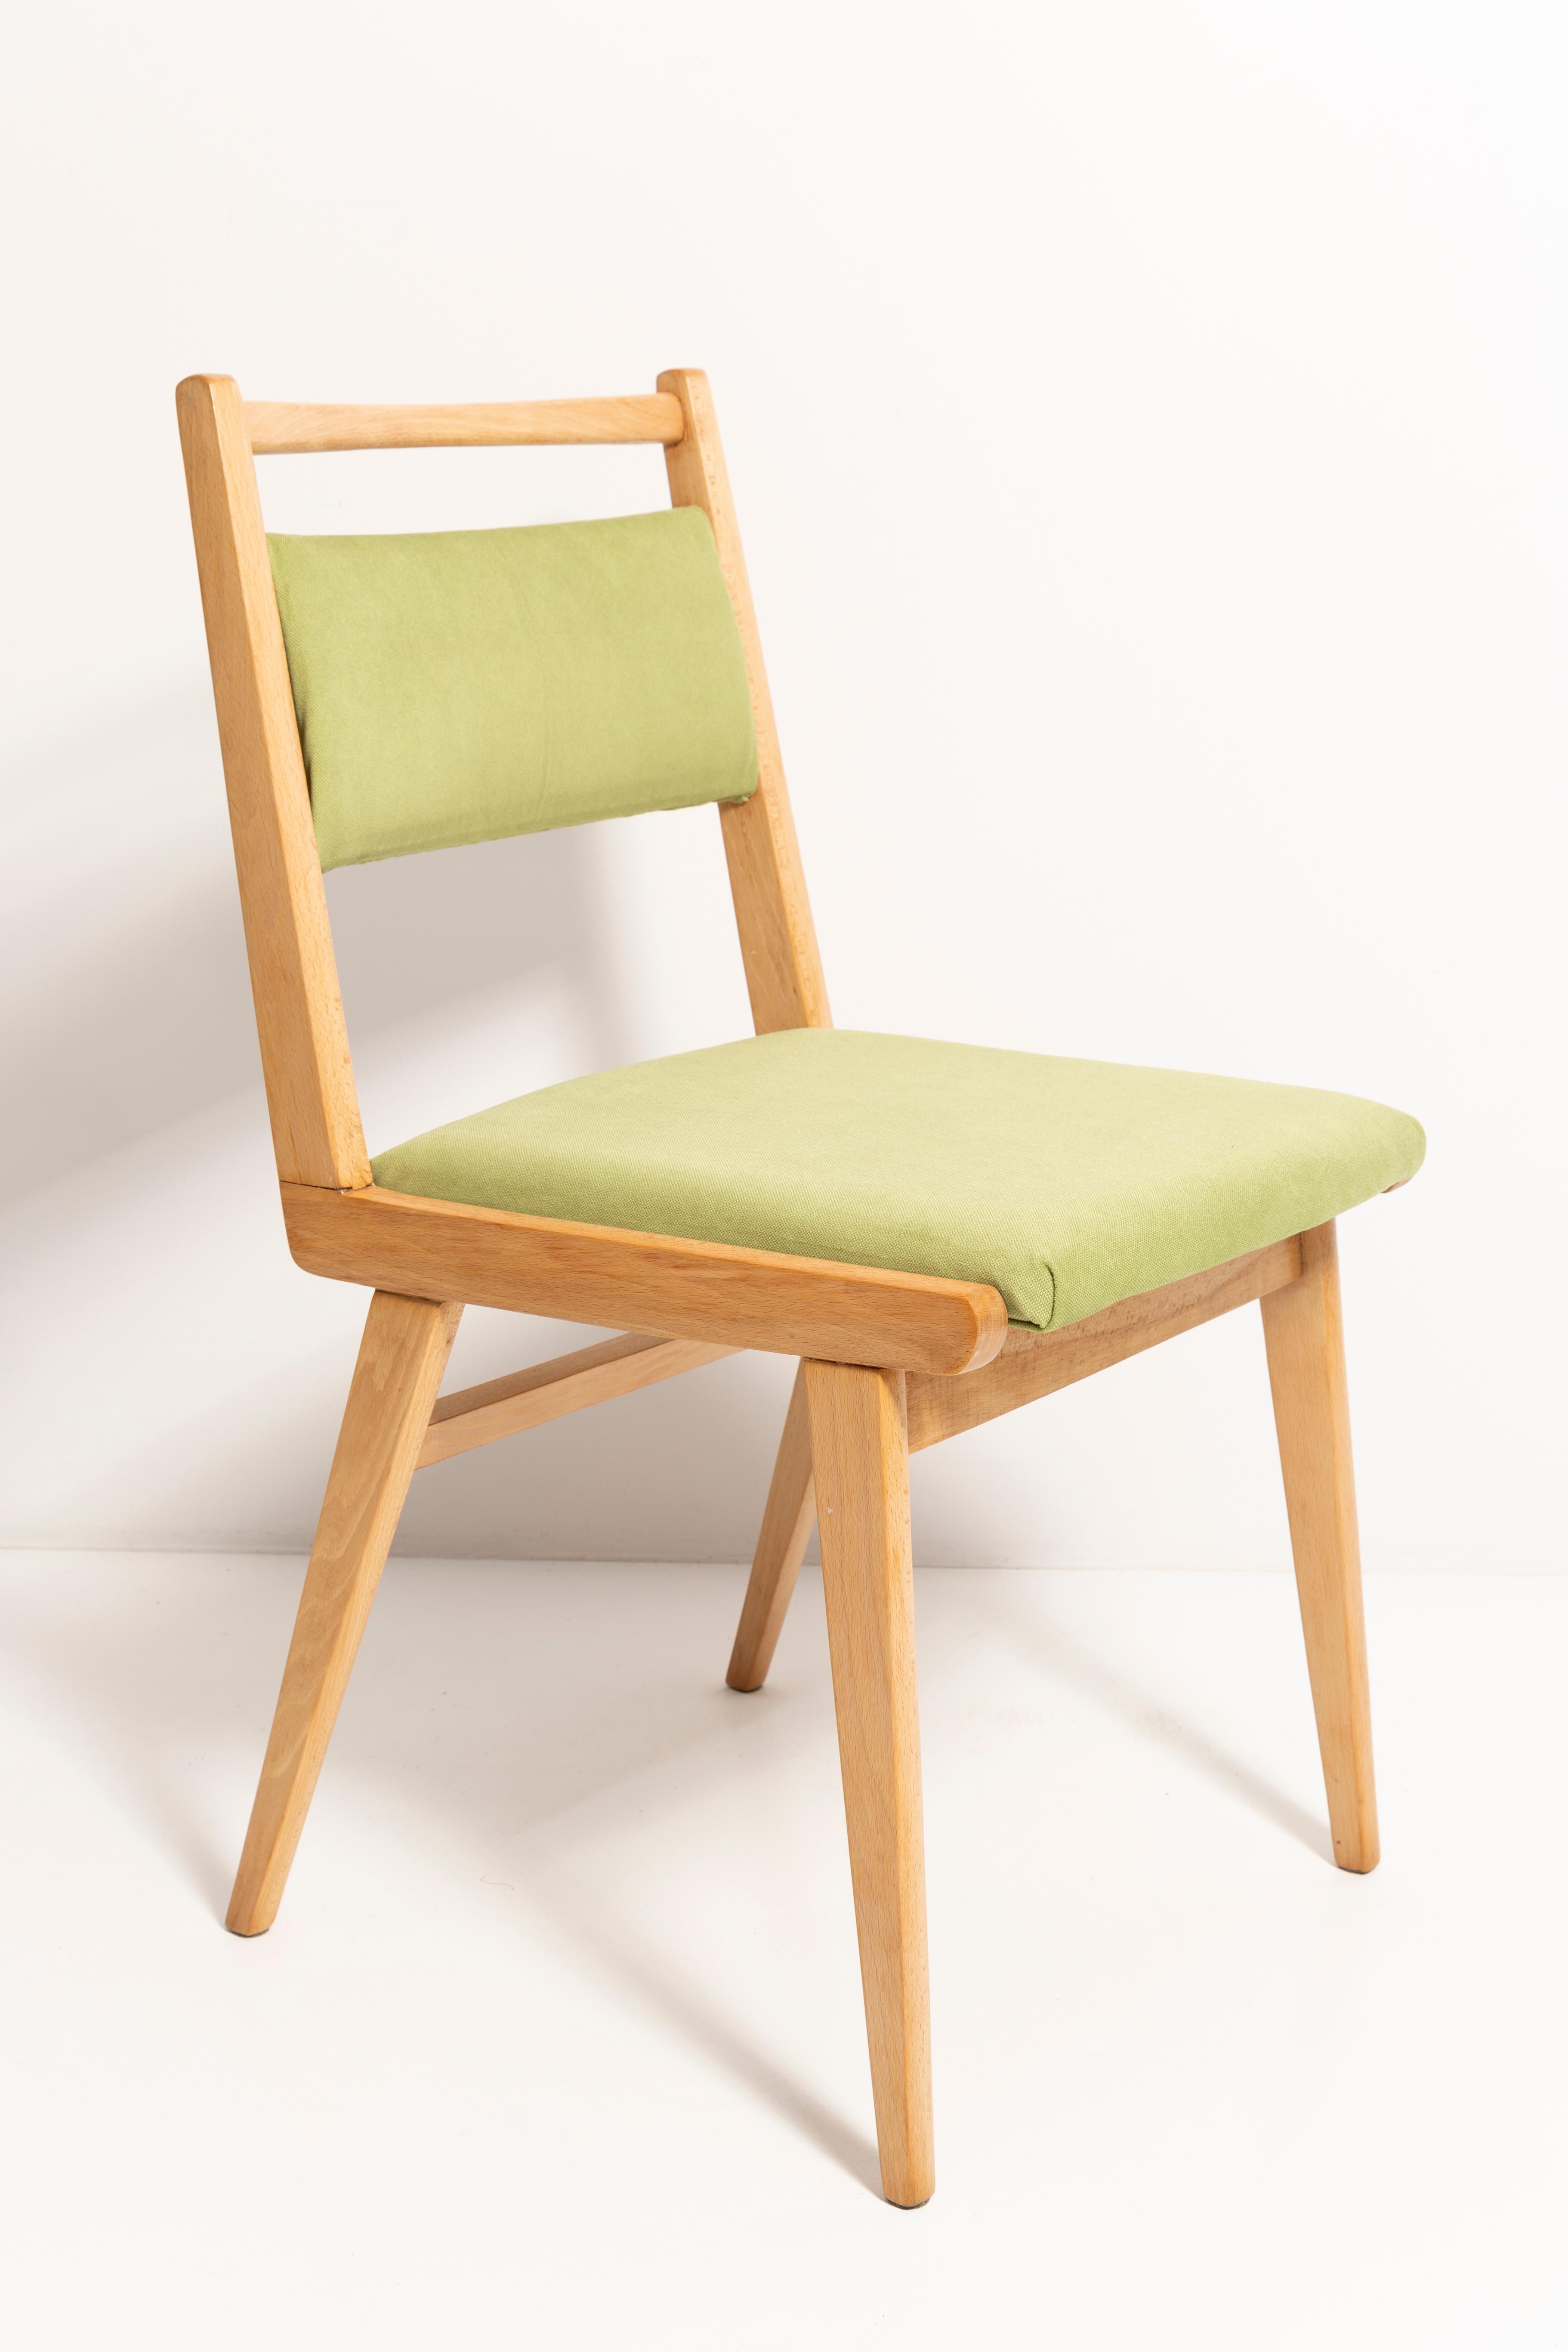 Chairs designed by Prof. Rajmund Halas. It is jar type model. Made of beechwood. Chairs are after a complete upholstery renovation, the woodwork has been refreshed. Seat and back is dressed in a light green, durable and pleasant to the touch fabric.